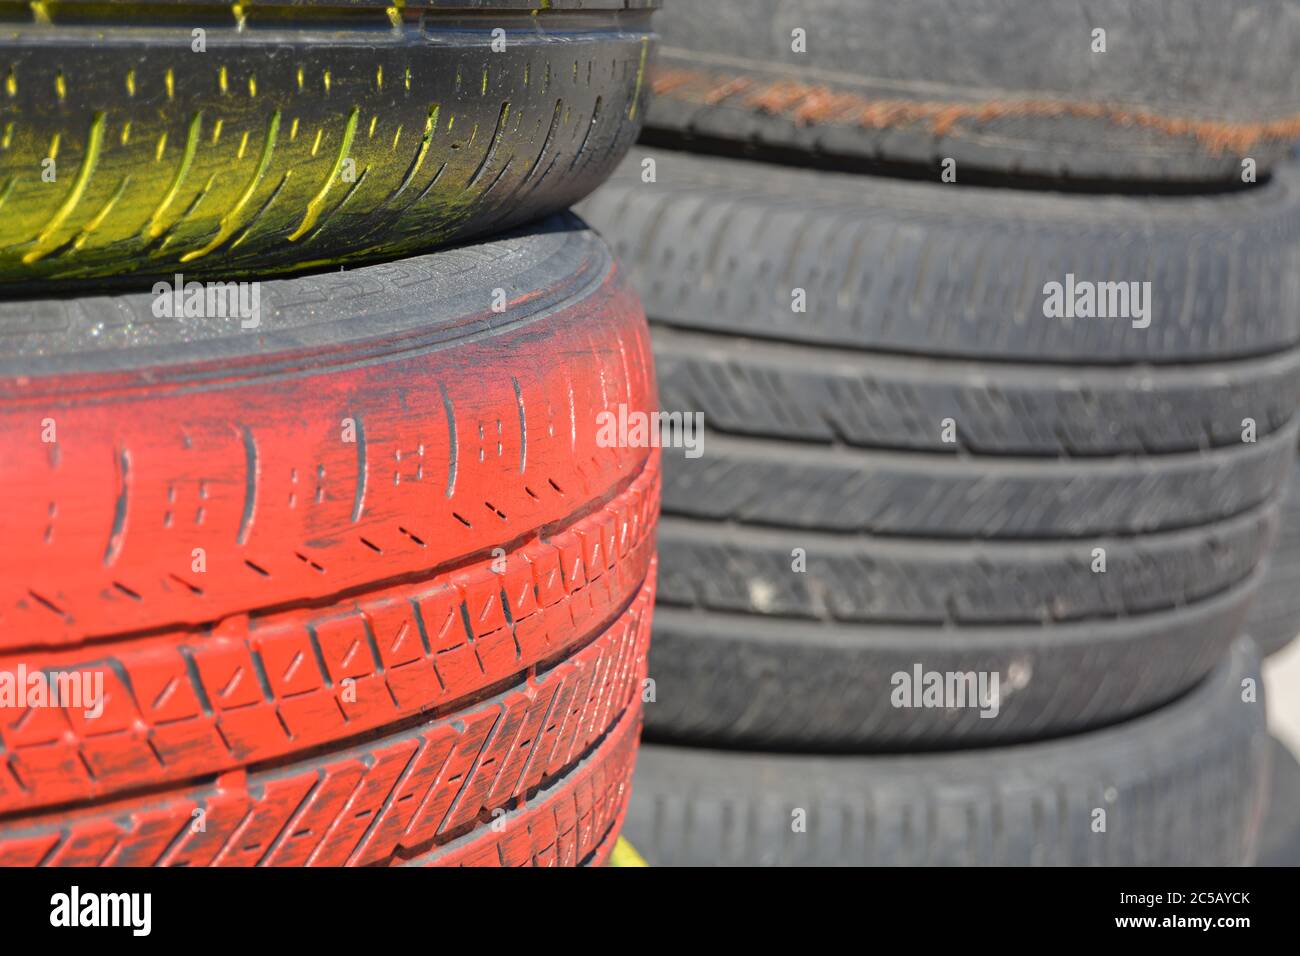 Tires. Red car tires vertically stacked / piled up. Good background for business card for the tire business. Picture for tire business card. Stock Photo